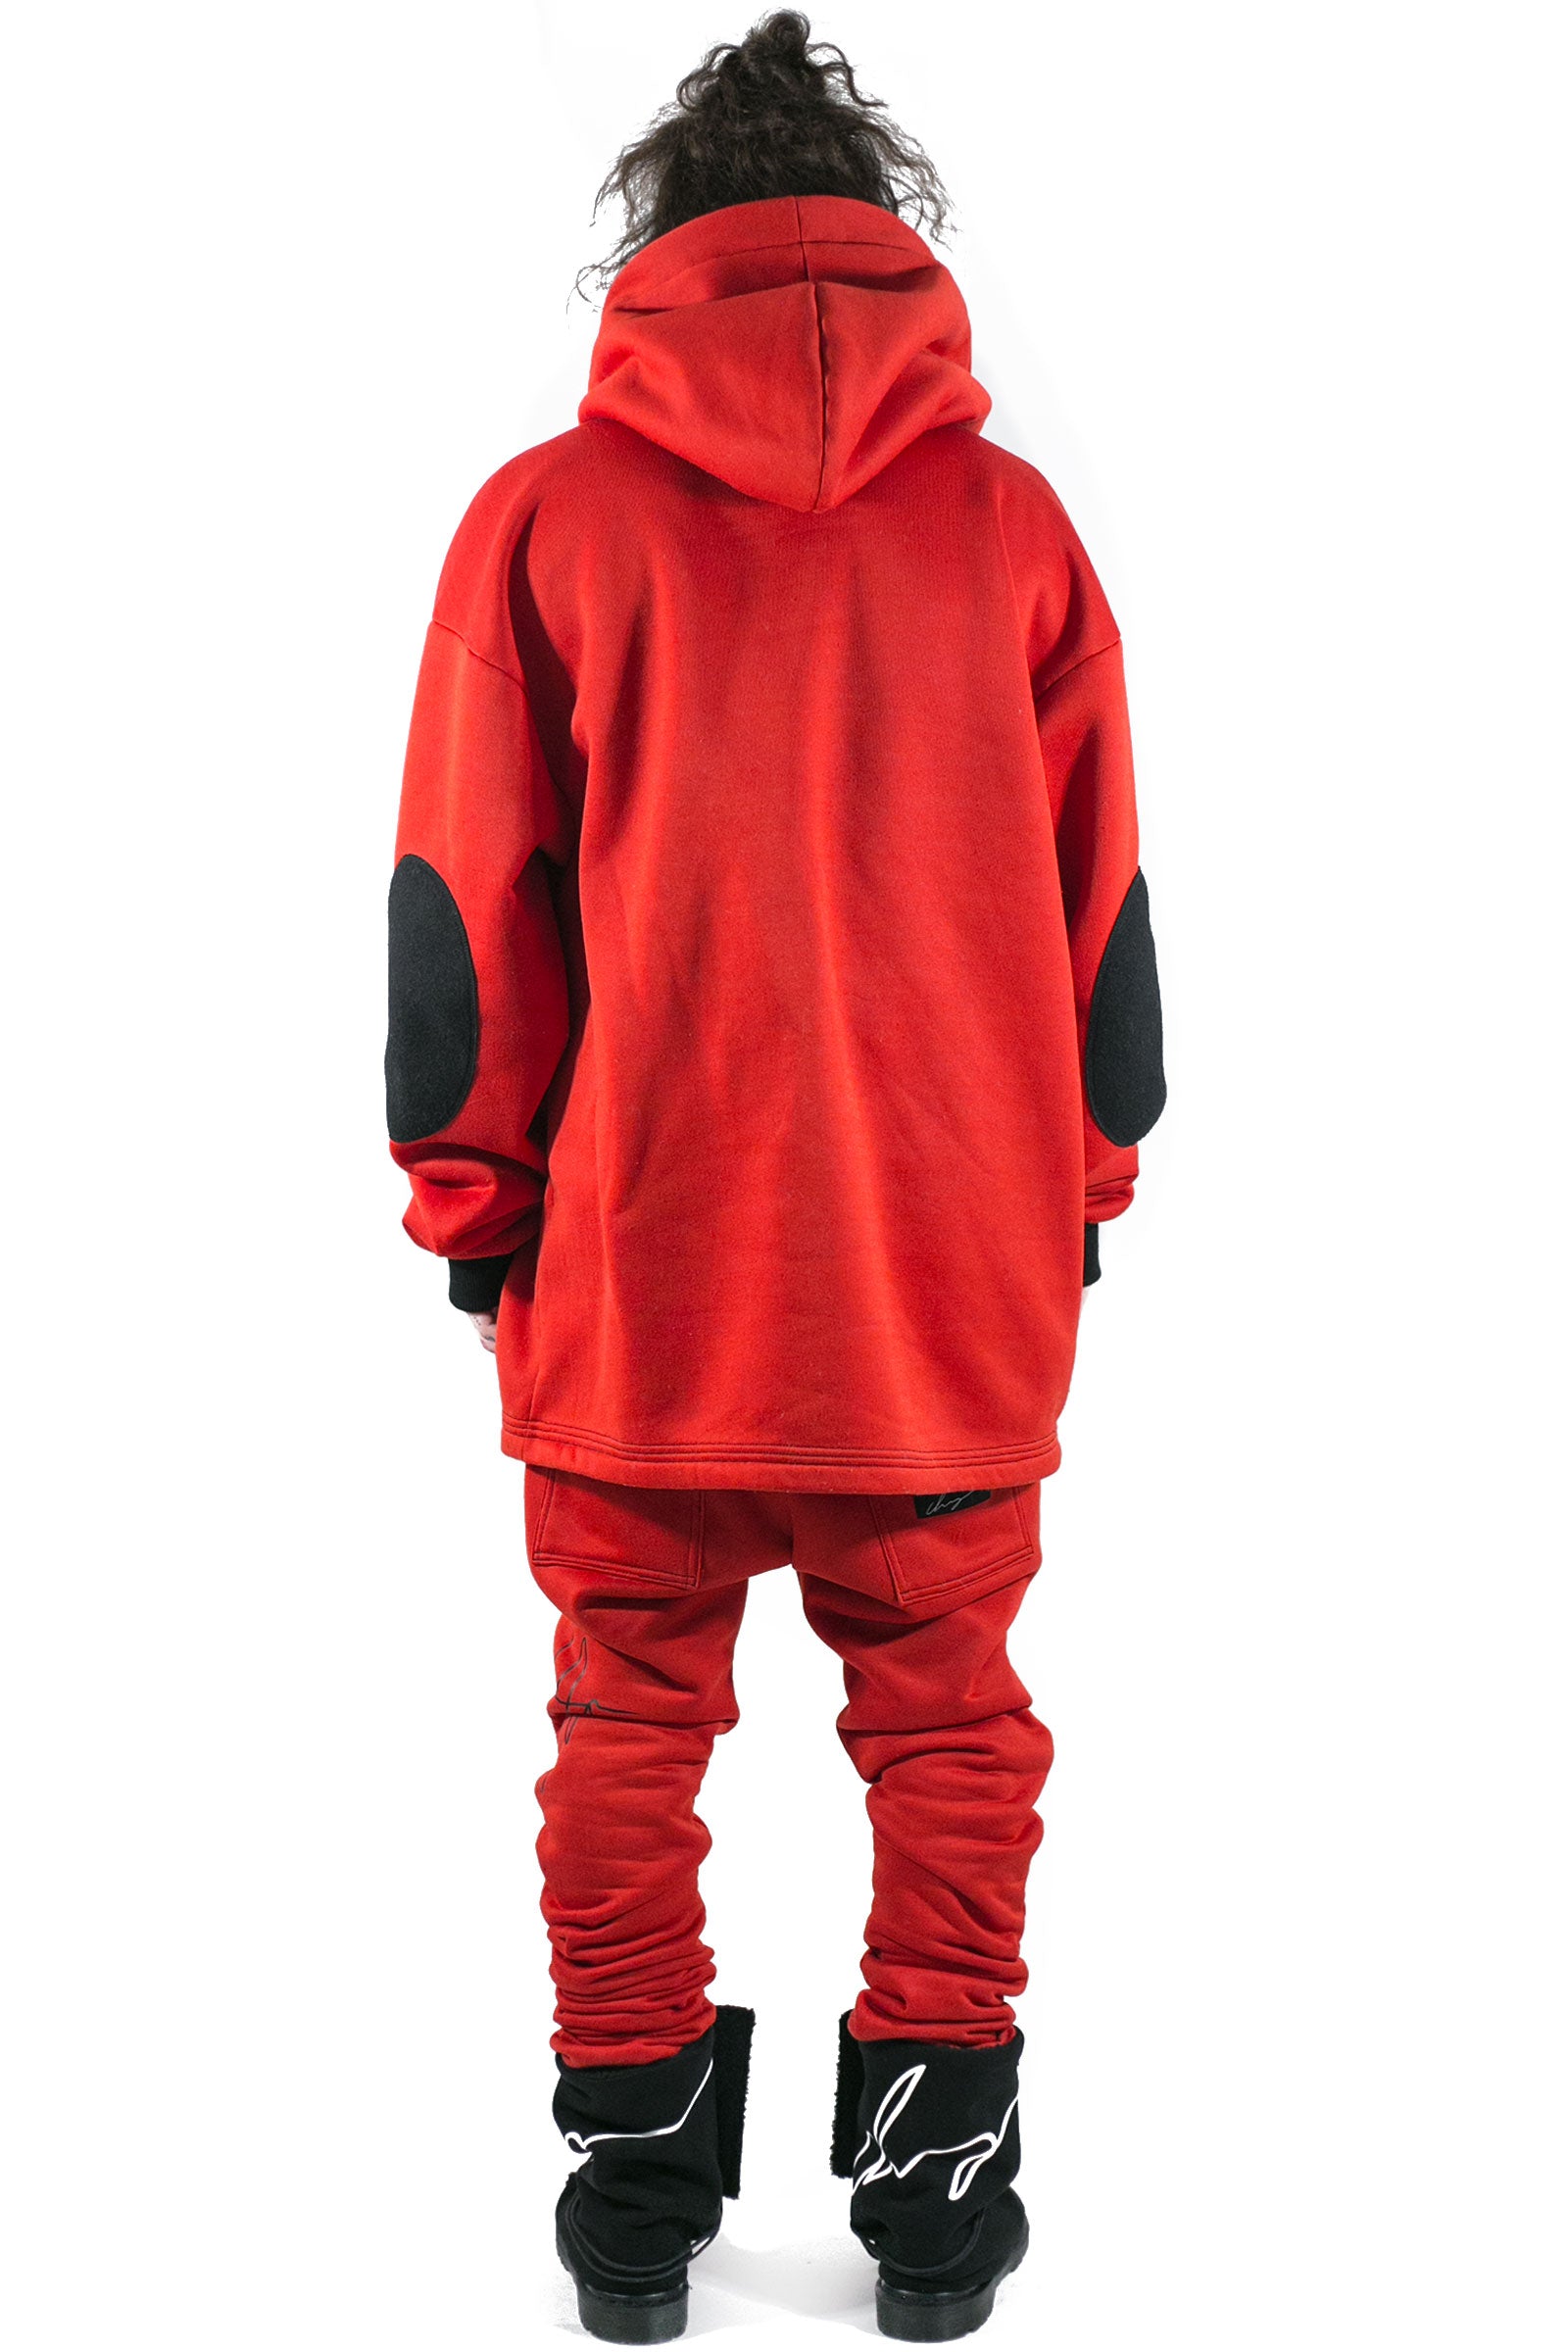 SS2022 Signature red hoodie